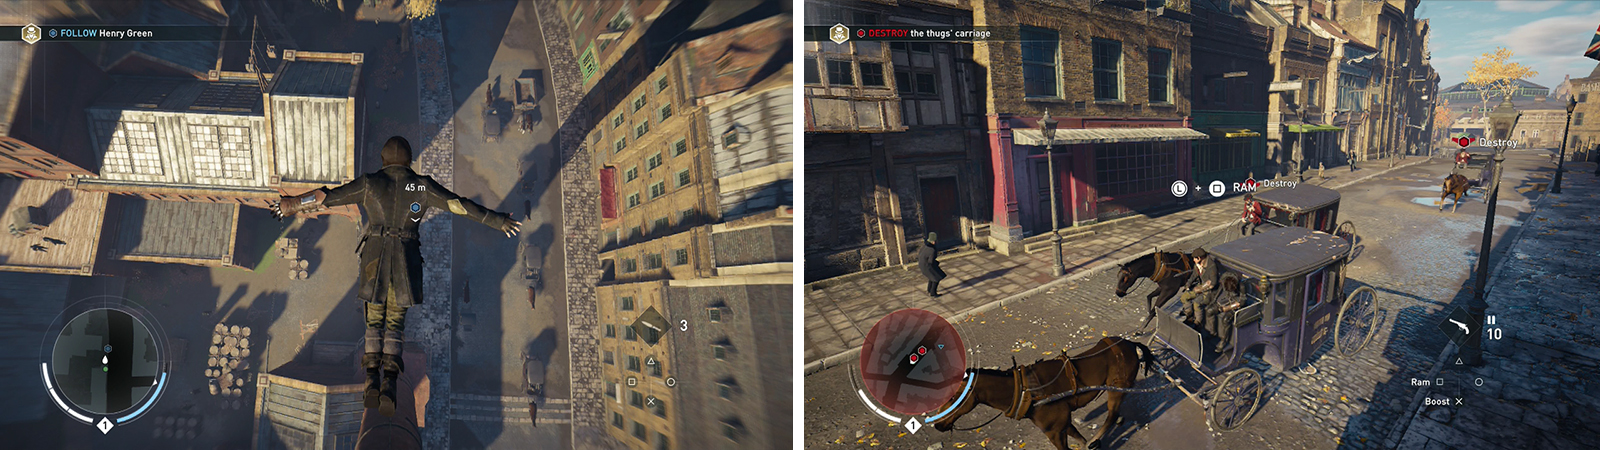 After syncronising dive into the haystack below (left). During the ensuing cart chase practice your vehicle combat to deal with pursuers (right).